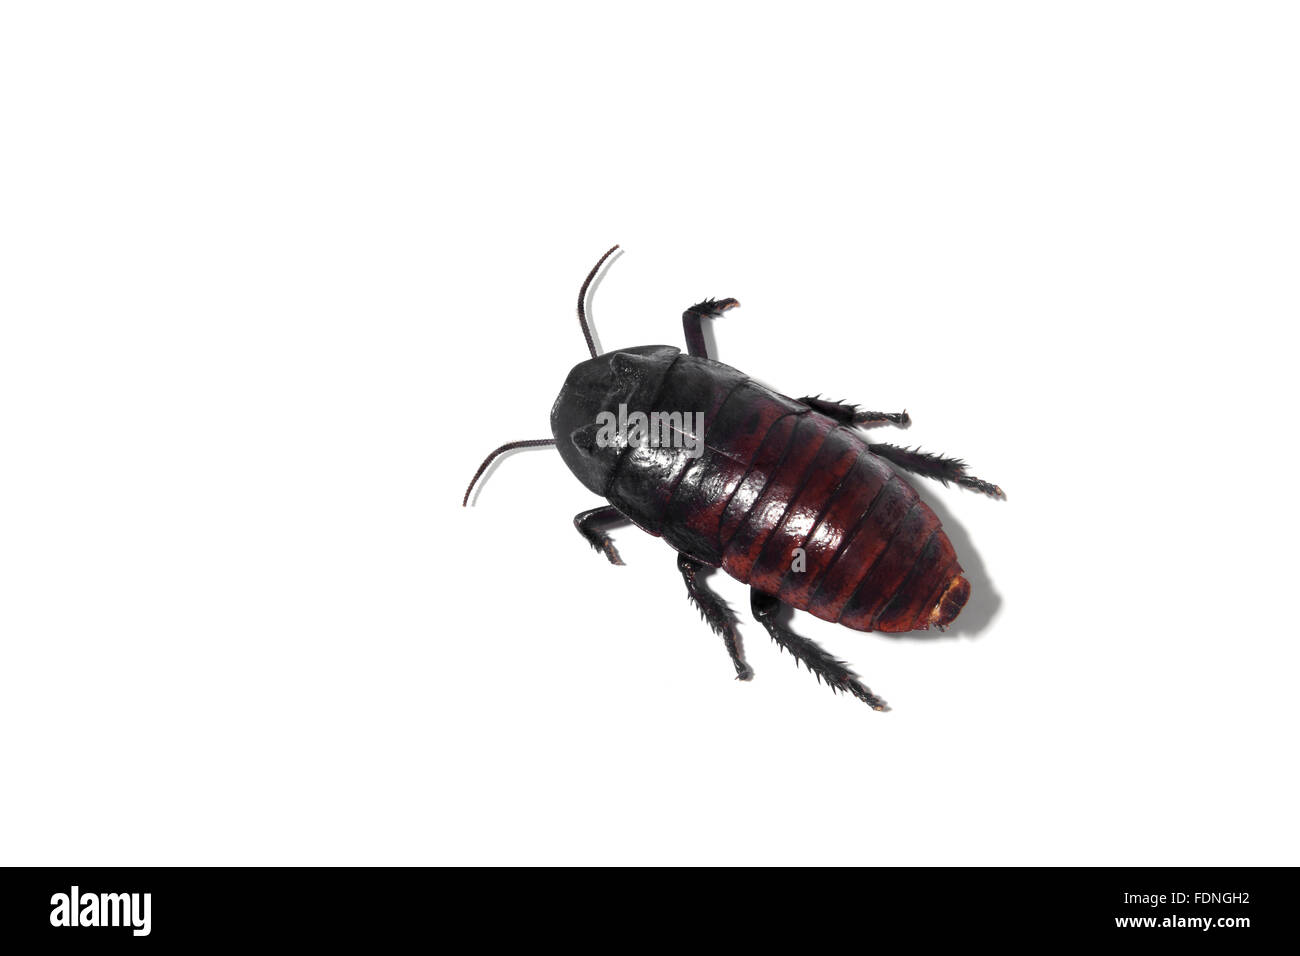 Studio shot of a Cockroach on white background Stock Photo